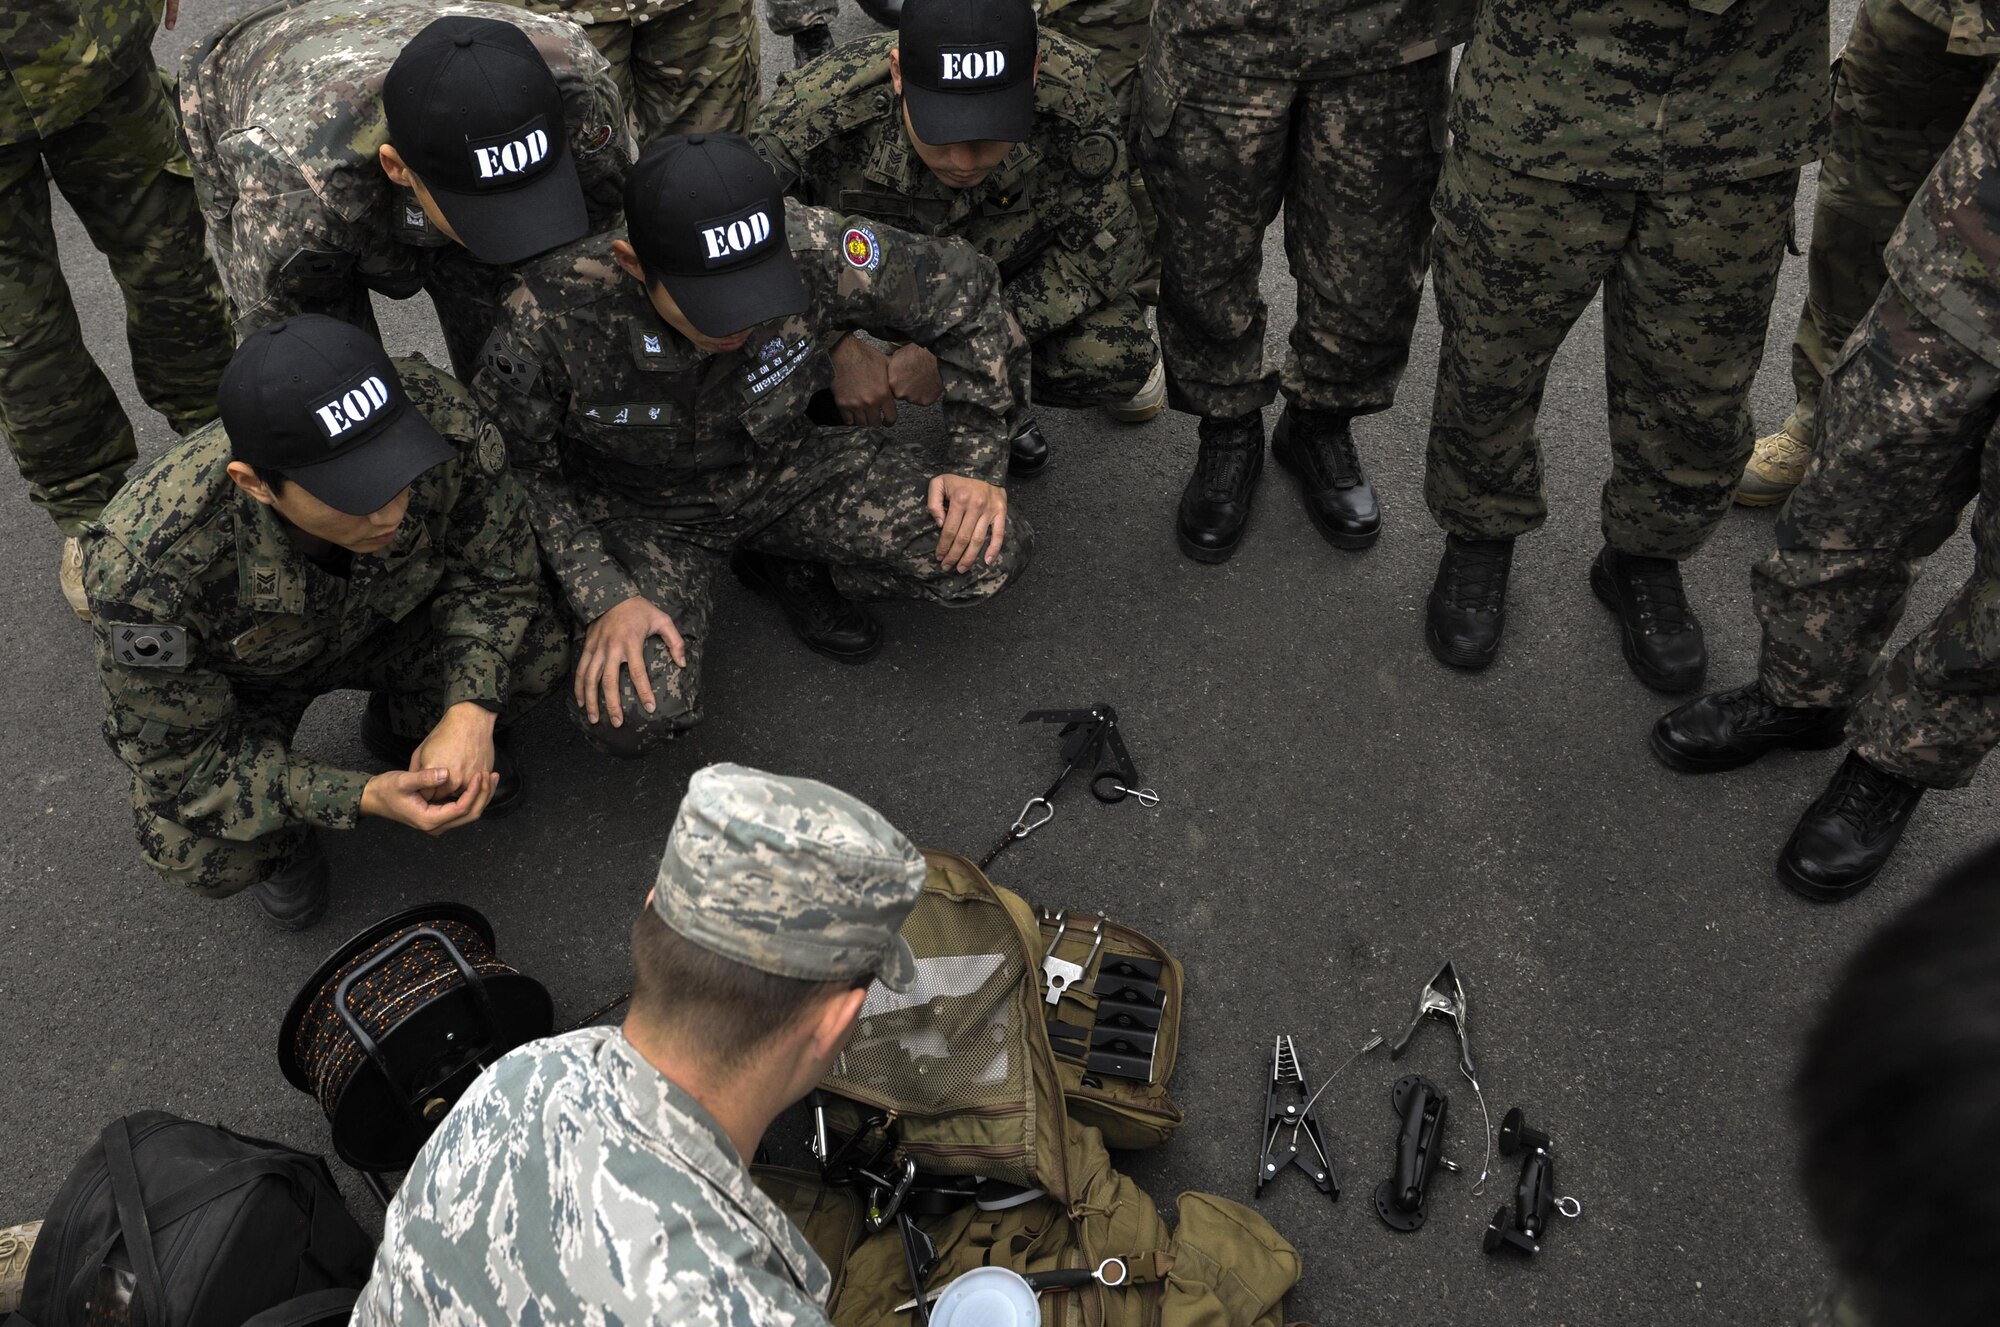 U.S. Air Force Staff Sgt. William Riddle, 8th Civil Engineer Squadron explosive ordinance disposal technician, displays U.S. EOD equipment to Republic of Korea Air Force EOD at Kunsan Air Base, Republic of Korea, Nov. 7, 2016. ROKAF EOD members visited with the U.S. EOD team to learn how they train and what tools and techniques they use. (U.S. Air Force photo by Senior Airman Colville McFee/Released)